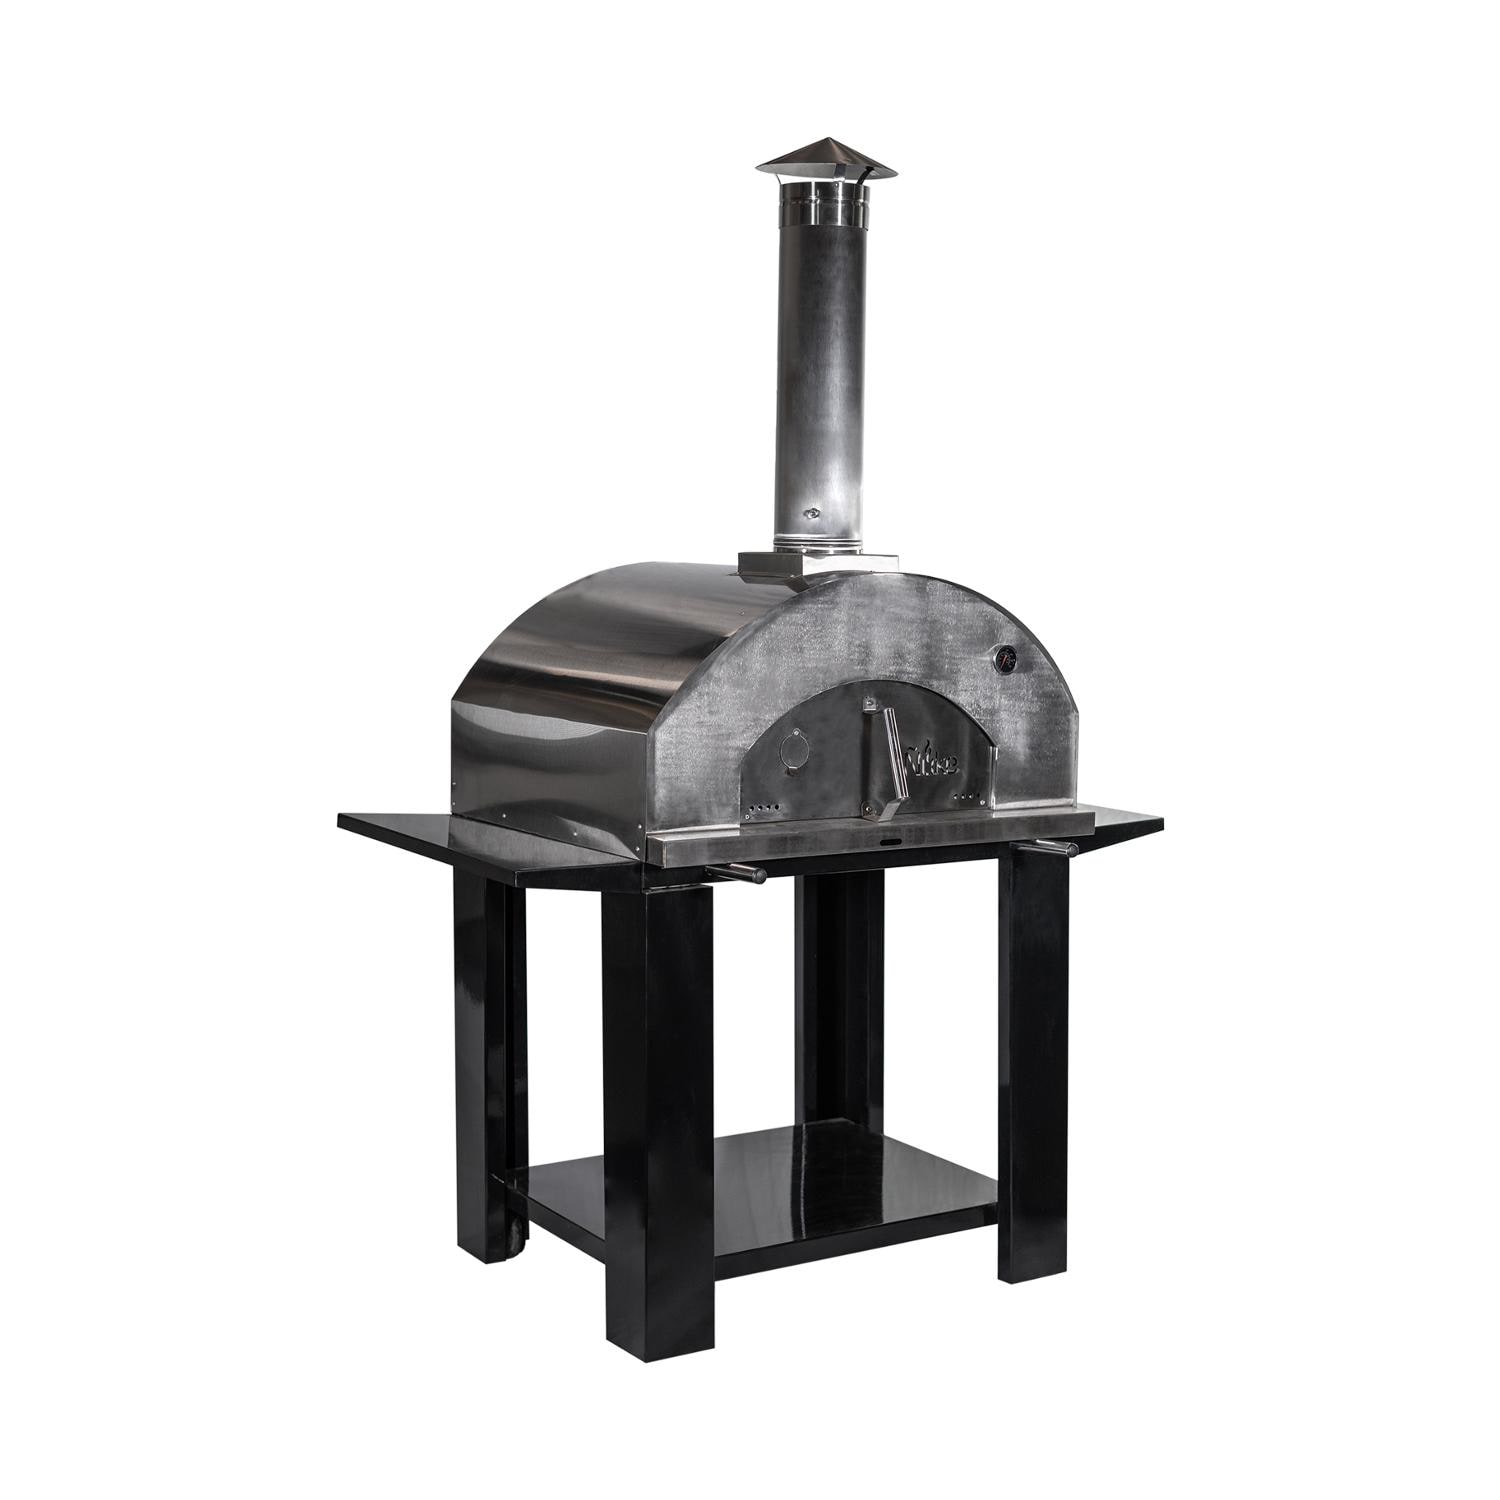 Nuke 31 Inch Outdoor Wood Fired Stainless Steel Freestanding Pizza Cooking Oven - image 1 of 6